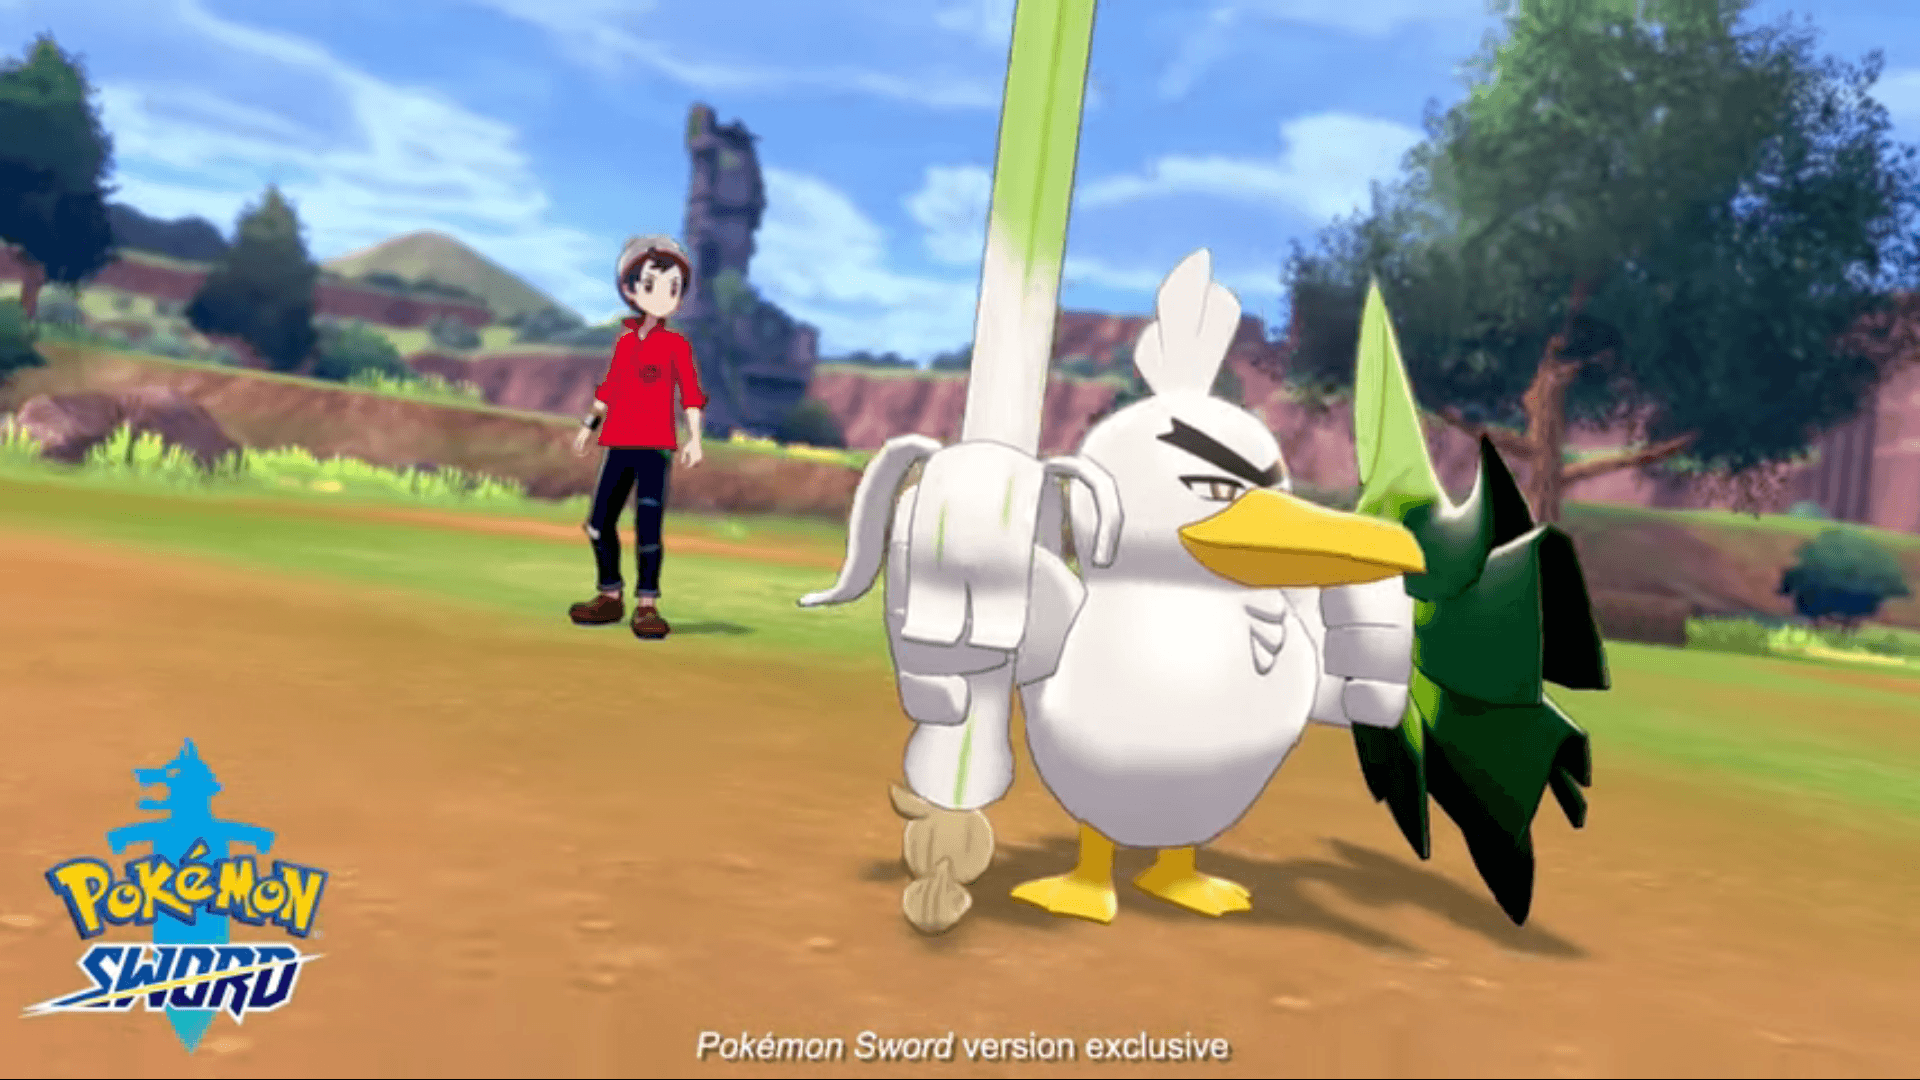 Sirfetch'd is confirmed to be a Pokémon Sword exclusive